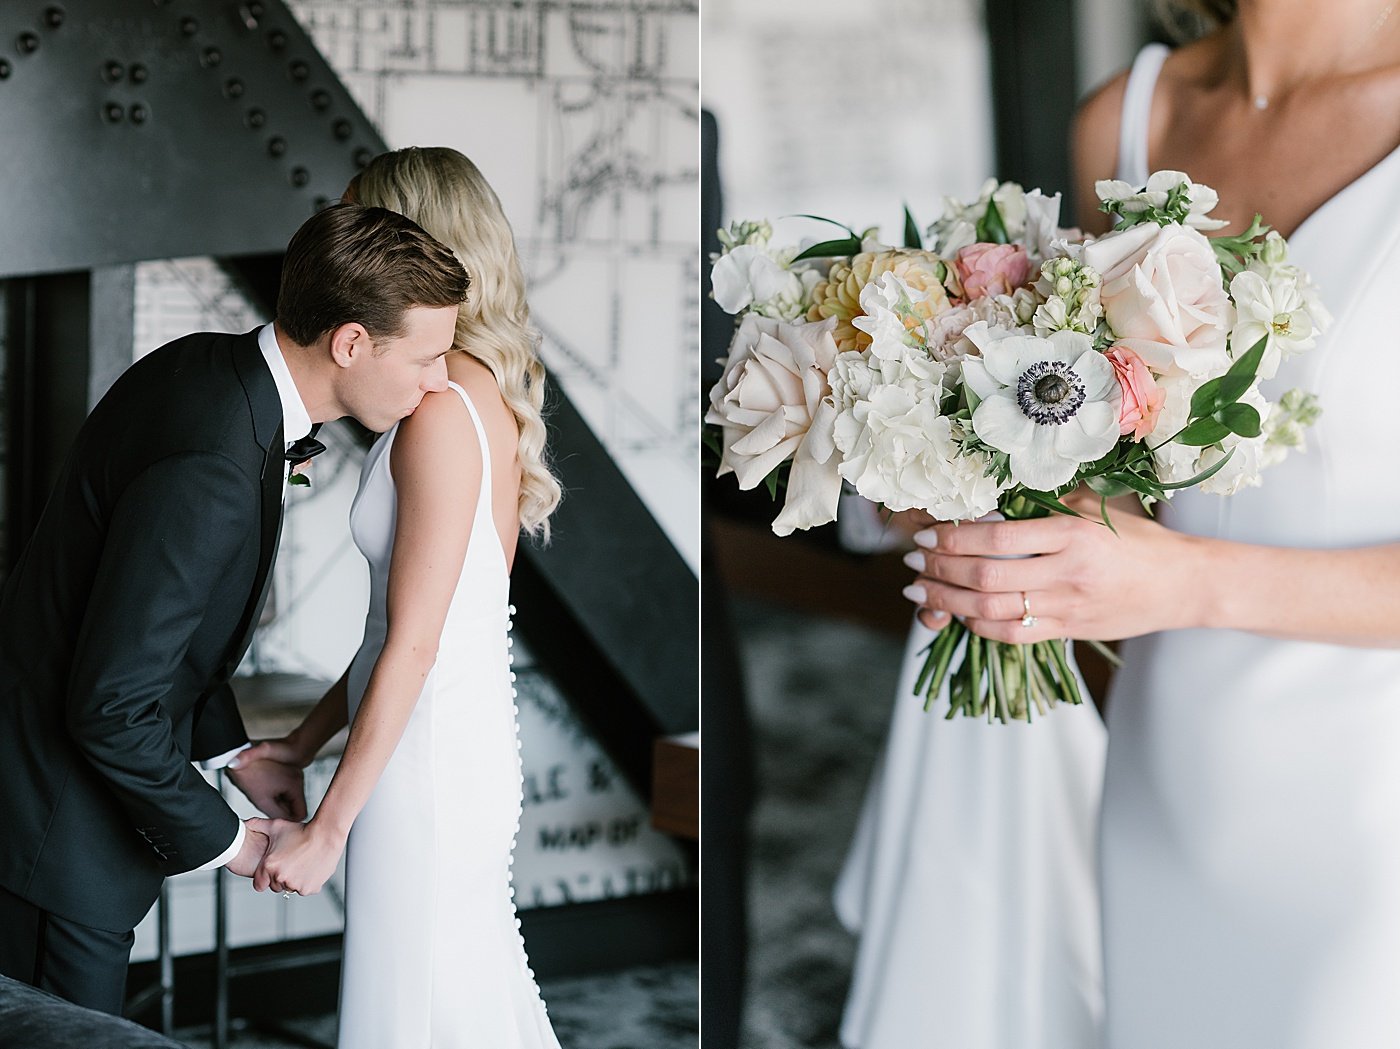 Rebecca Shehorn Photography Haley and Will's Bottleworks Indy Hotel Wedding-125.jpg